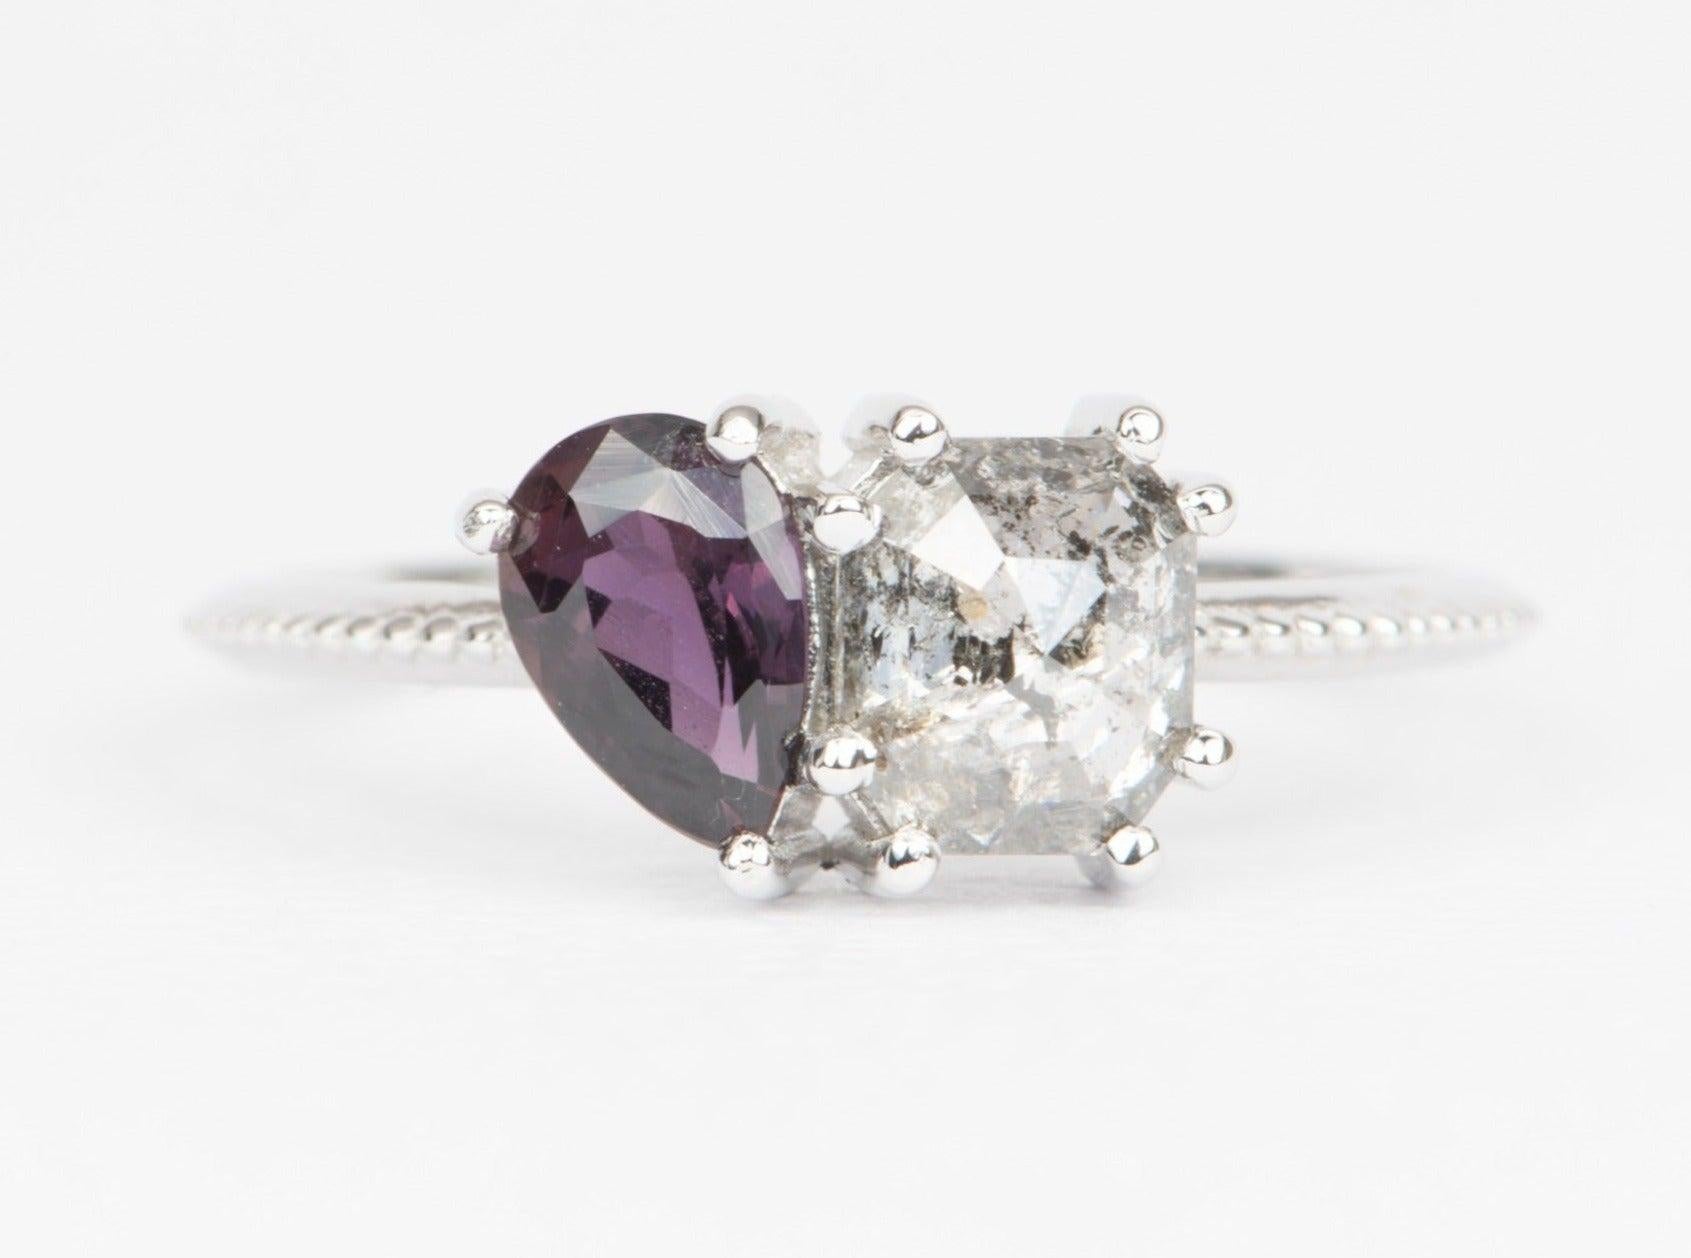 ♥ Solid 14k white gold salt and pepper diamond and Montana sapphire you and me ring
♥ The item measures 7.3 mm in length, 11.2 mm in width, and stands 4.7 mm from the finger
♥ The Montana sapphire has an uncommon color that is purplish red

♥ US